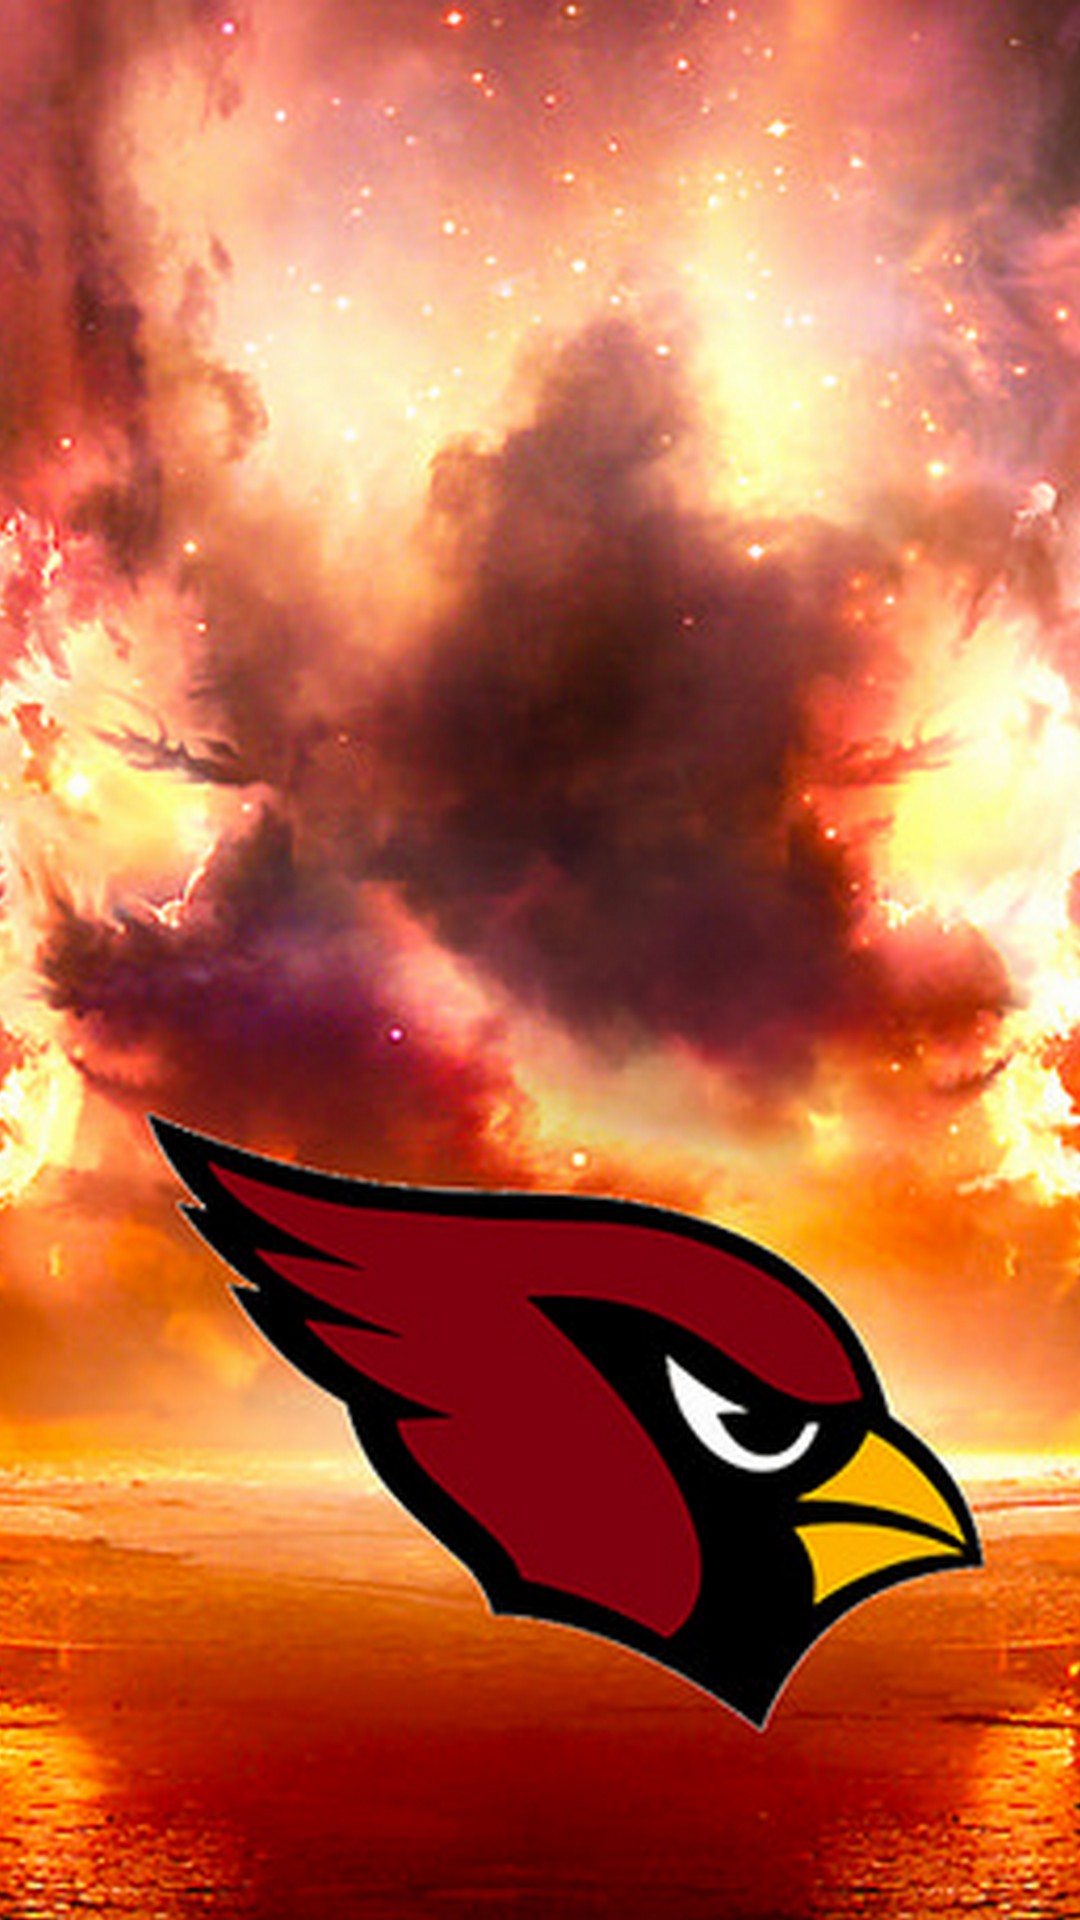 Arizona Cardinals iPhone Screen Lock Wallpaper With high-resolution 1080X1920 pixel. Download and set as wallpaper for Apple iPhone X, XS Max, XR, 8, 7, 6, SE, iPad, Android